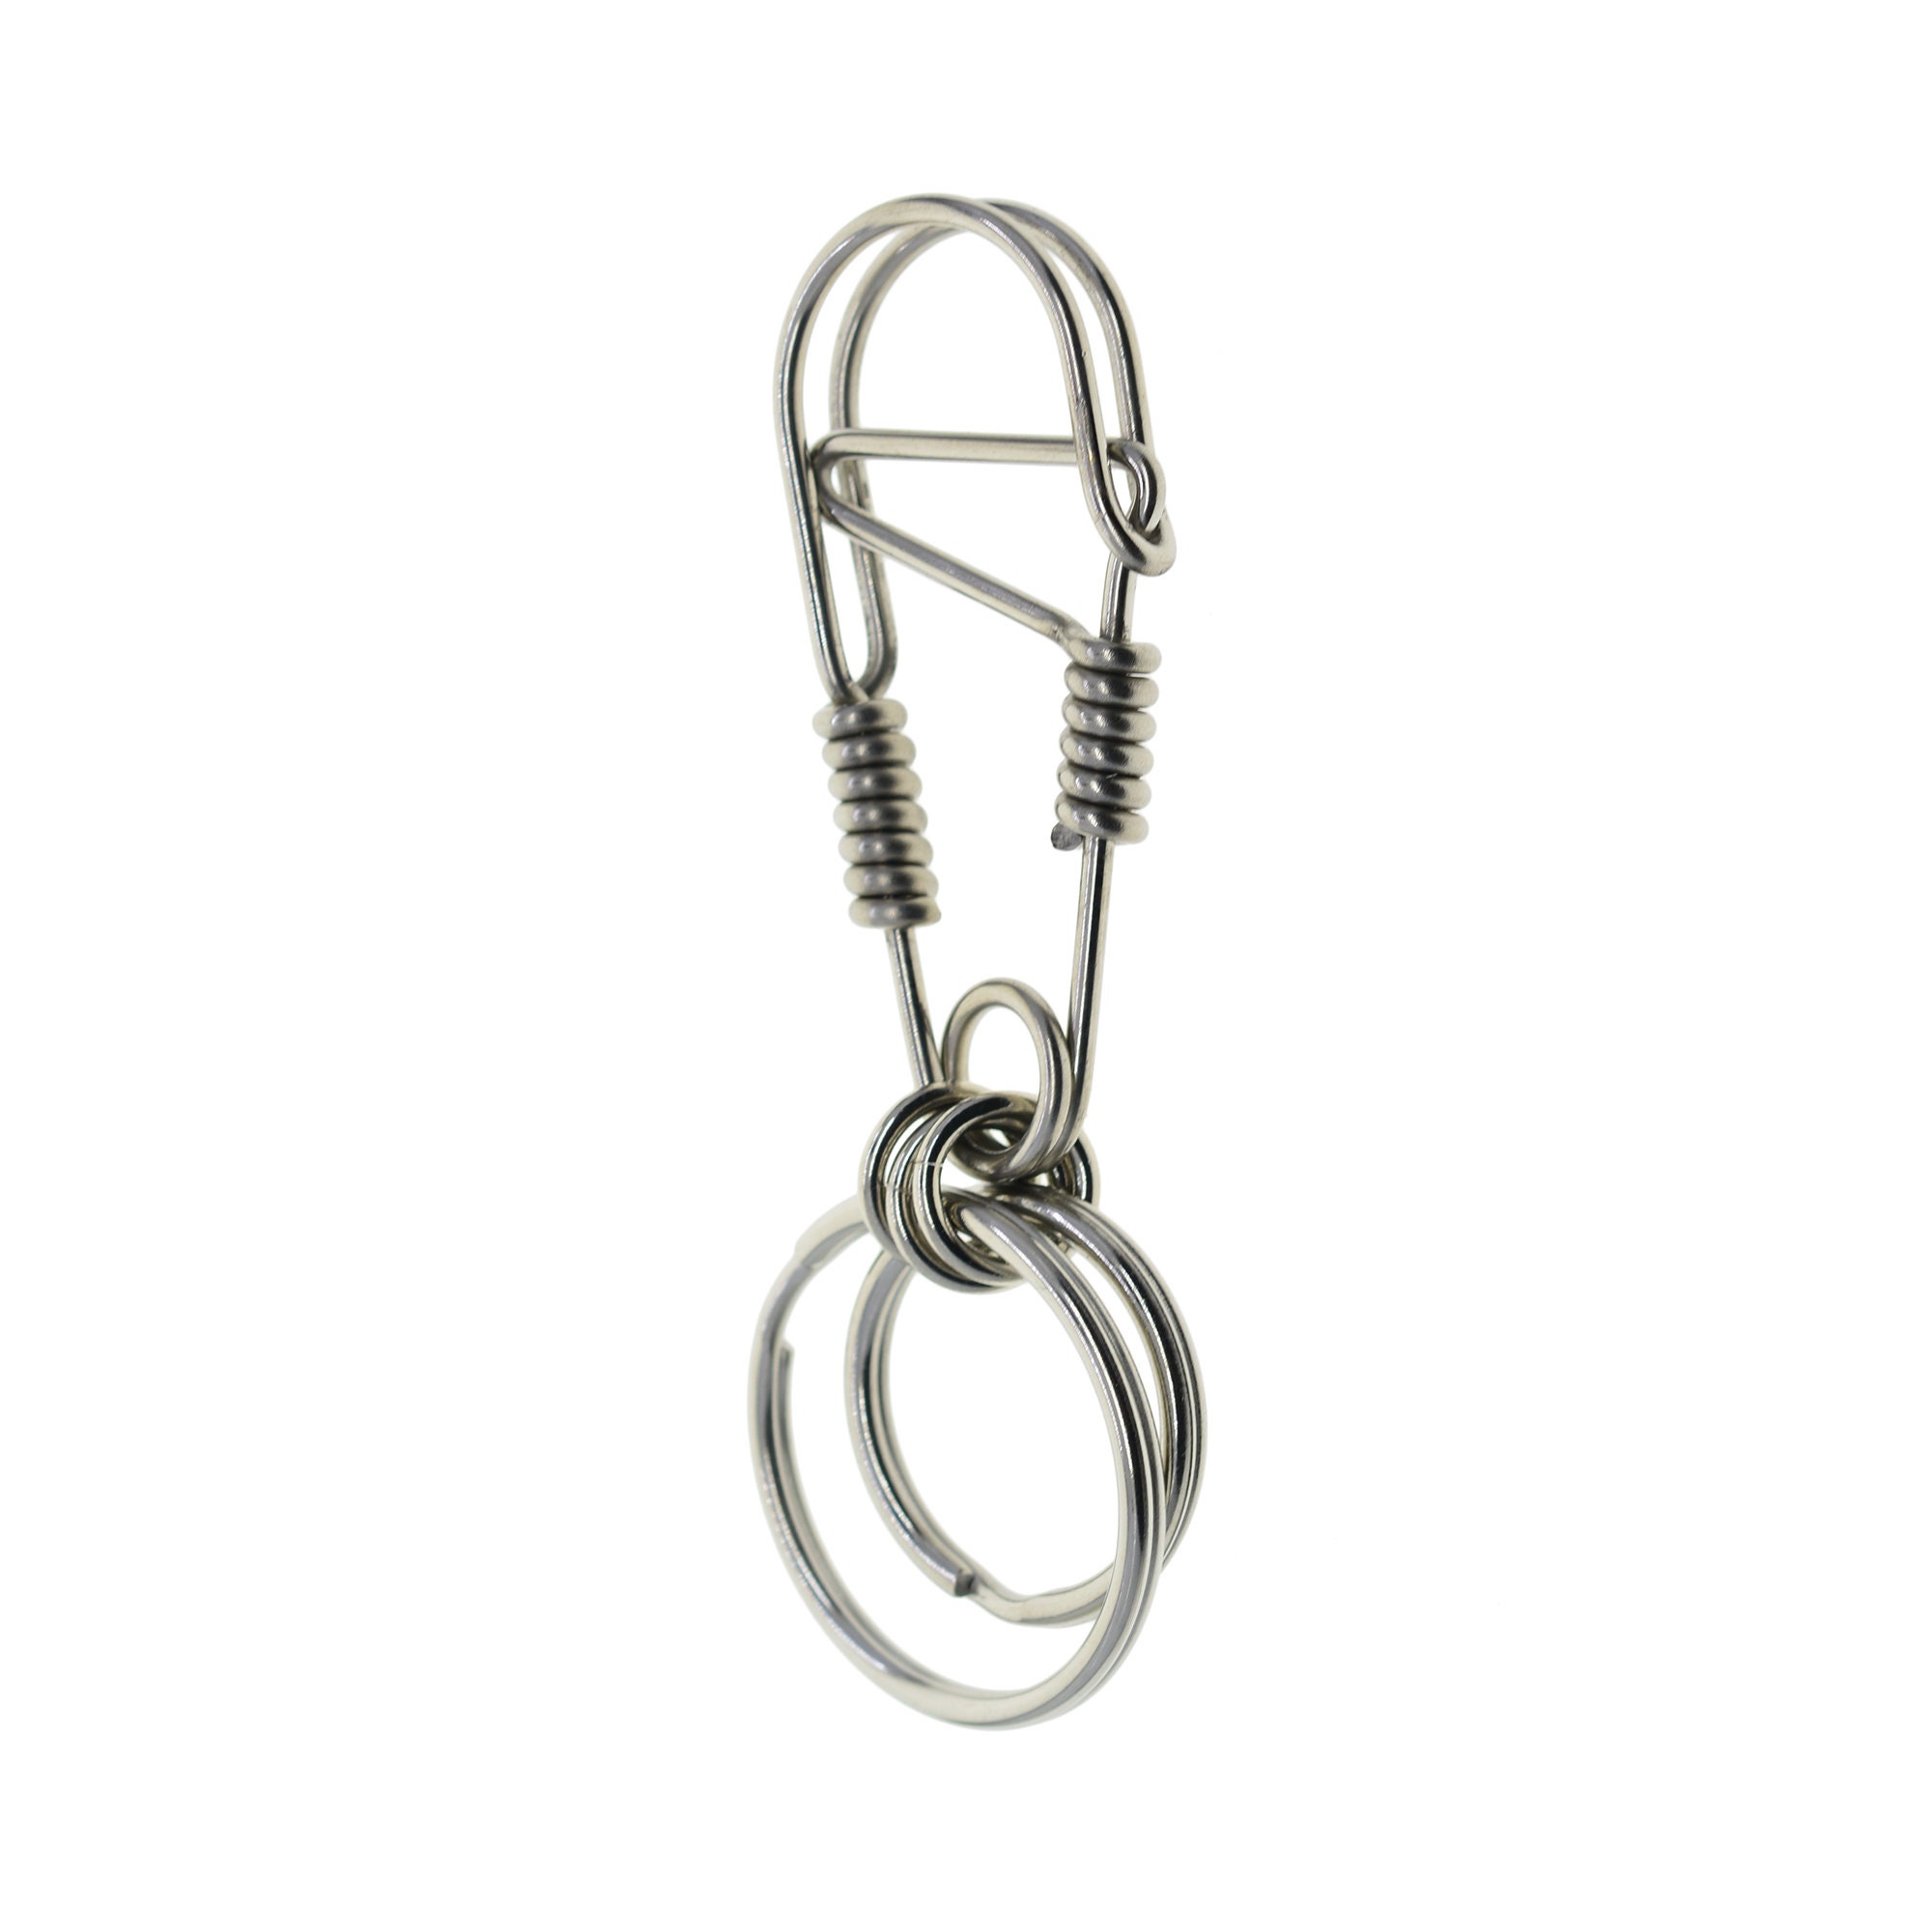 Minimalist Beads Wire Wrapped Stainless Steel Carabiner Keychain, Super  durable keychain - Buy once use forever